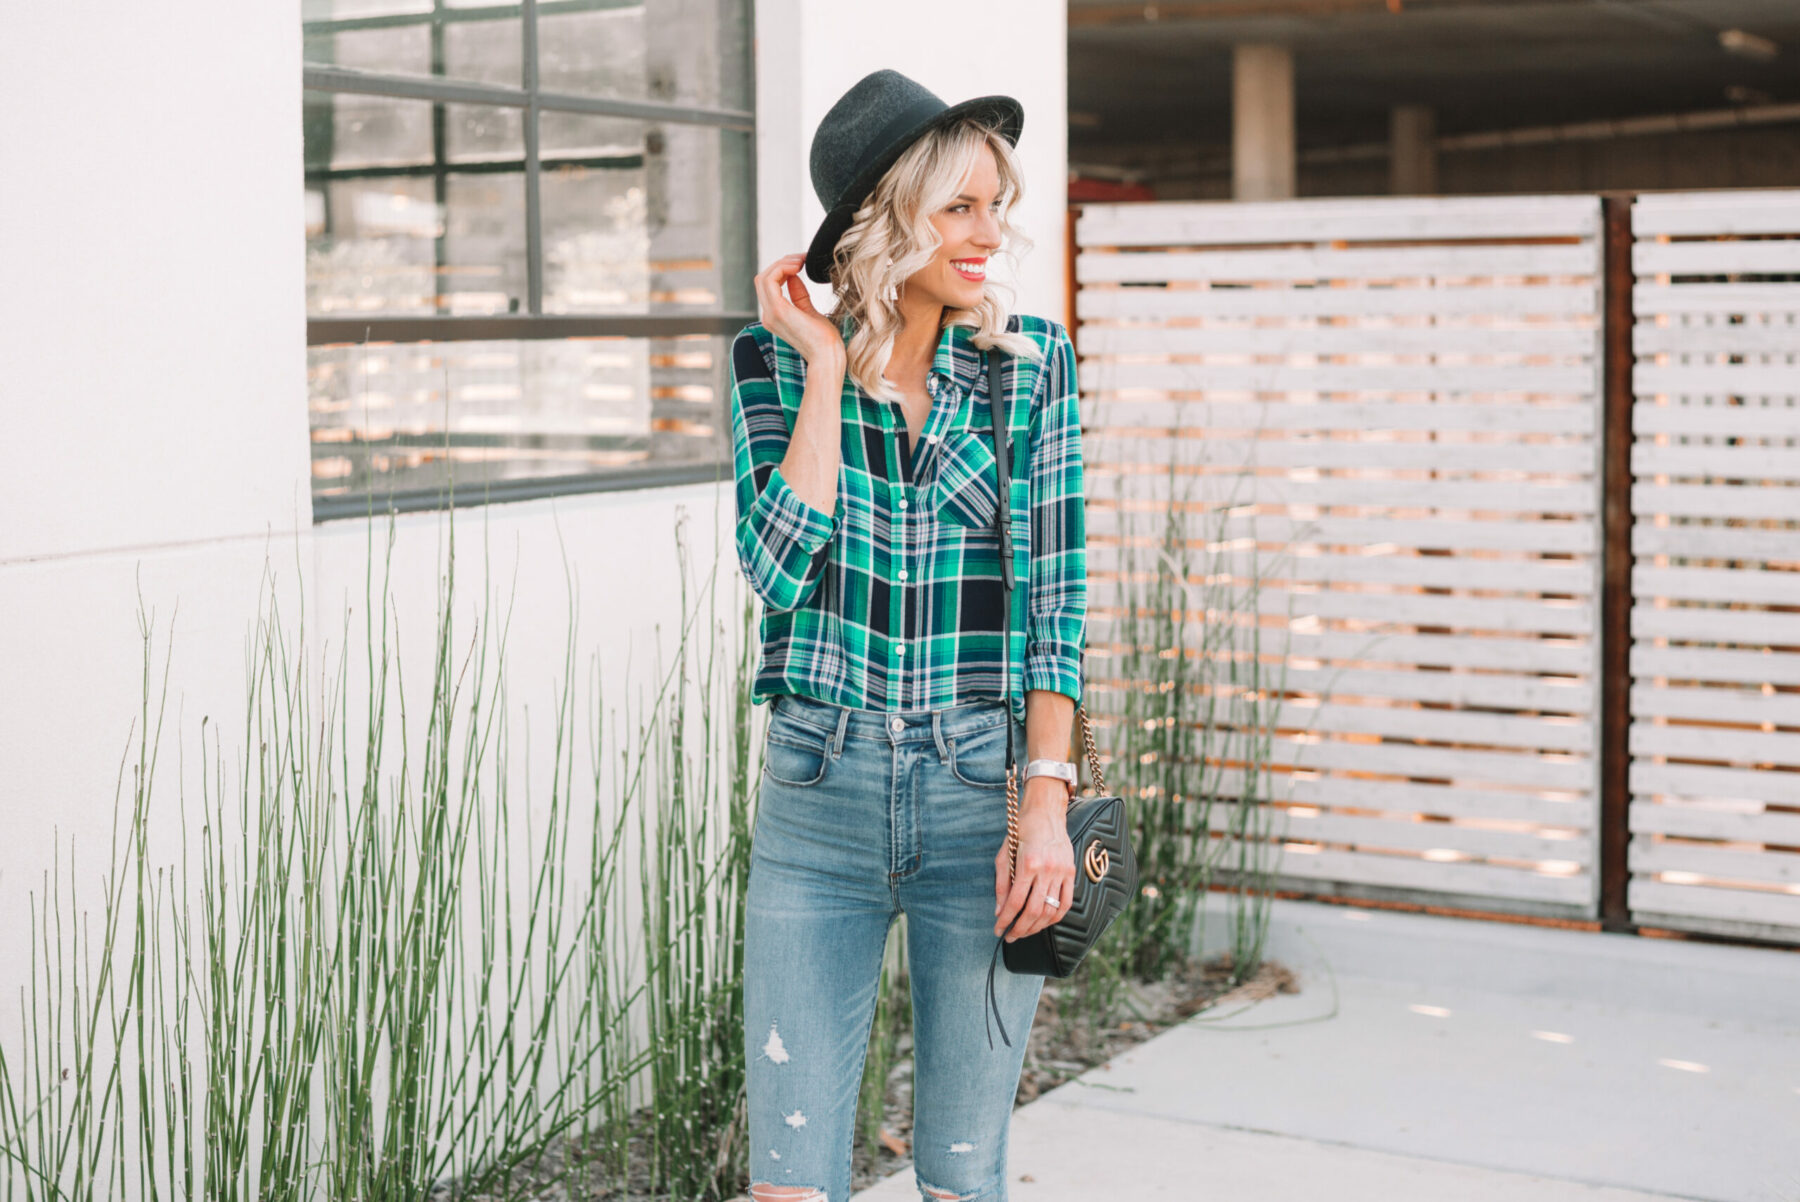 Ways to Wear Flannel and Plaid Shirt for All Season